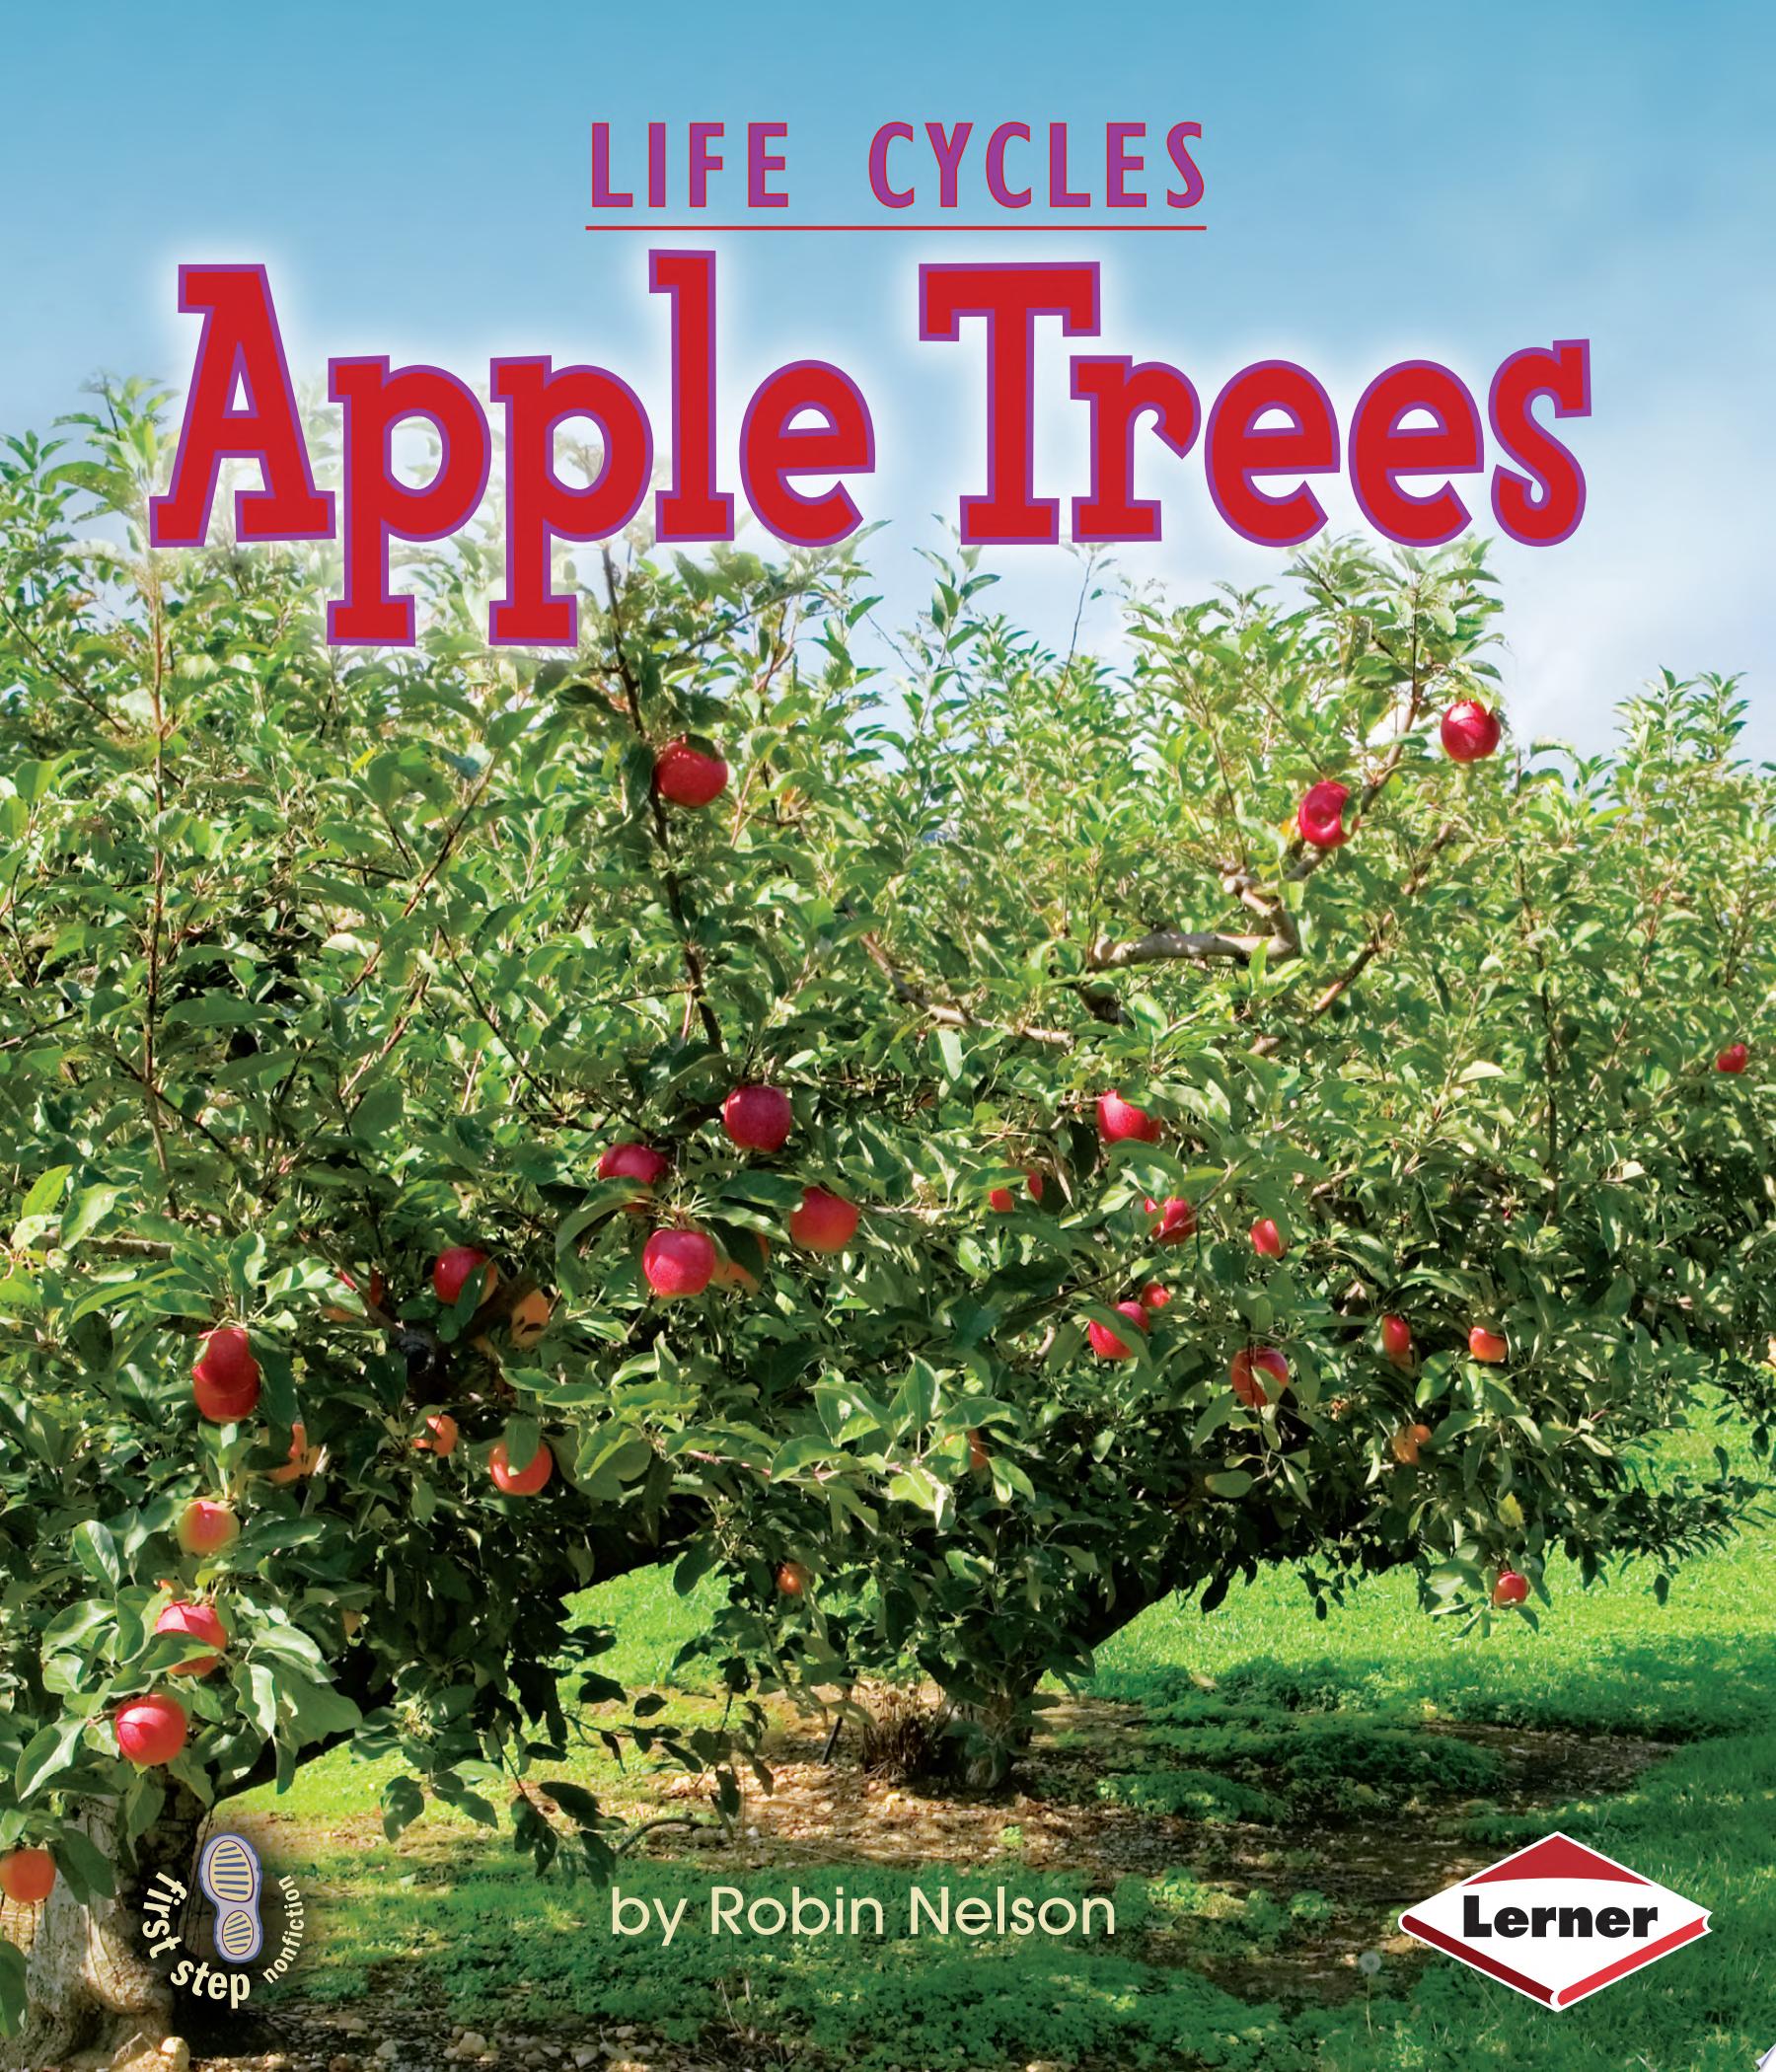 Image for "Apple Trees"